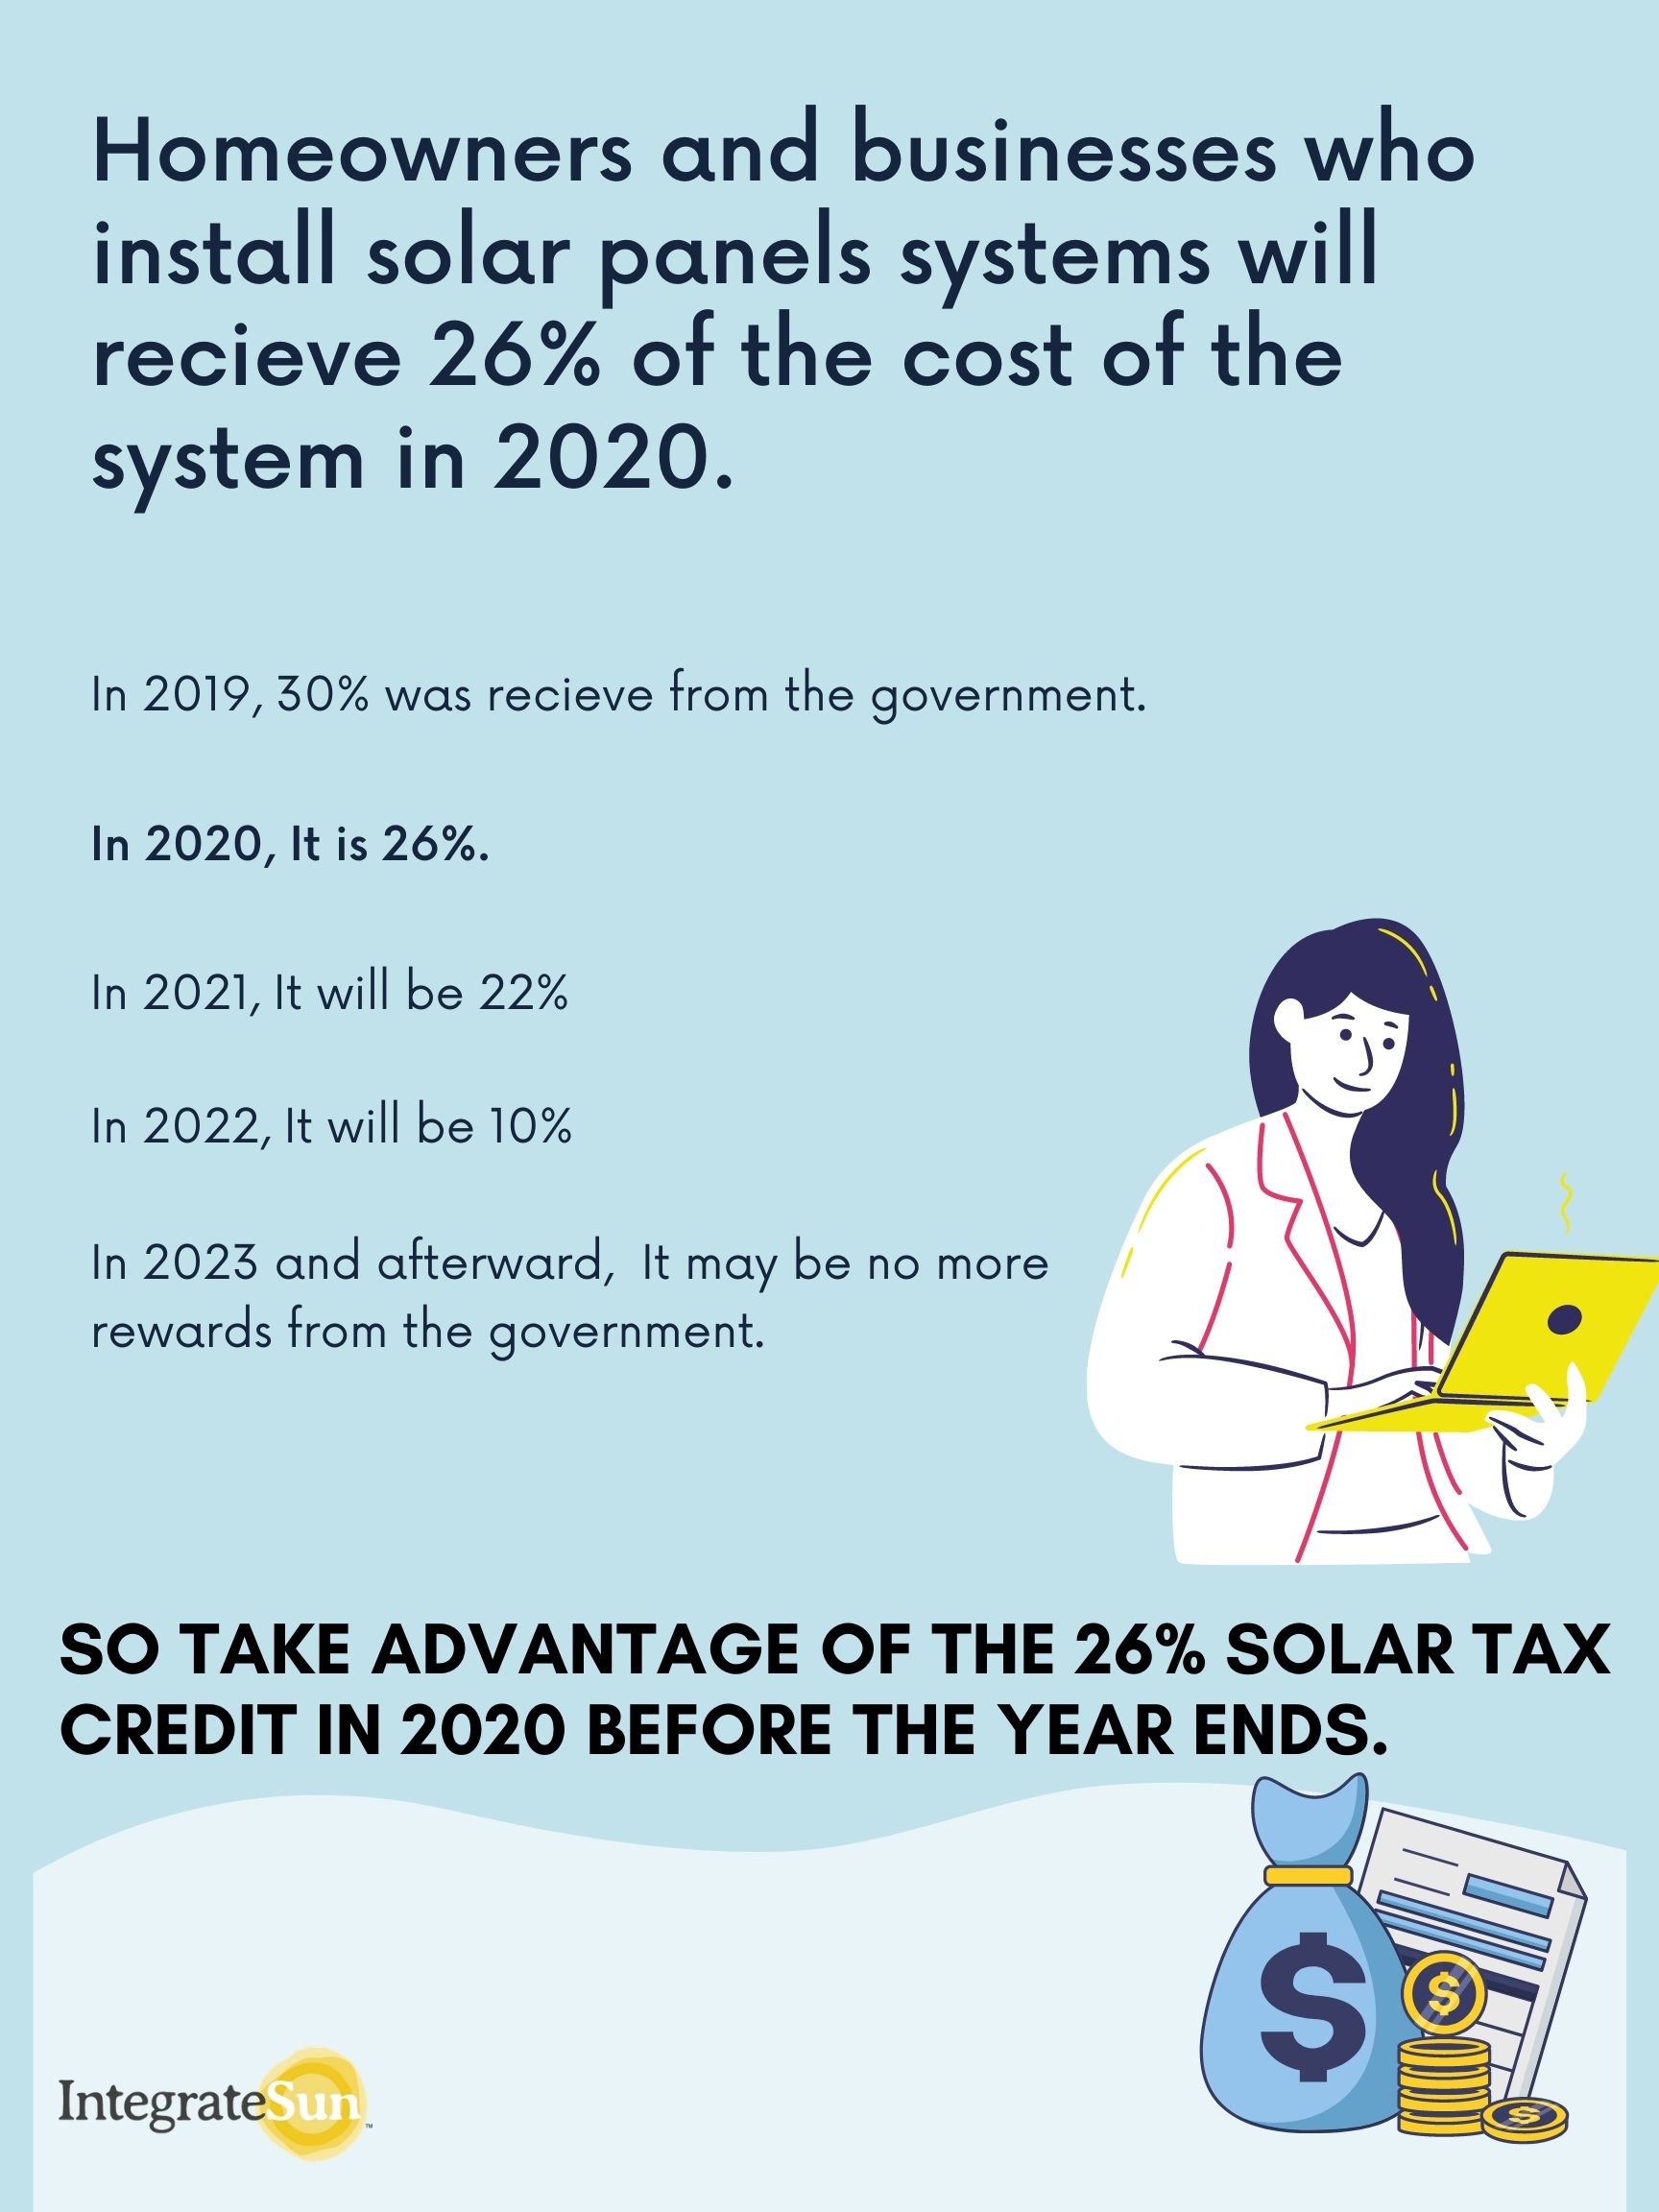 How do solar incentives work in 2020?